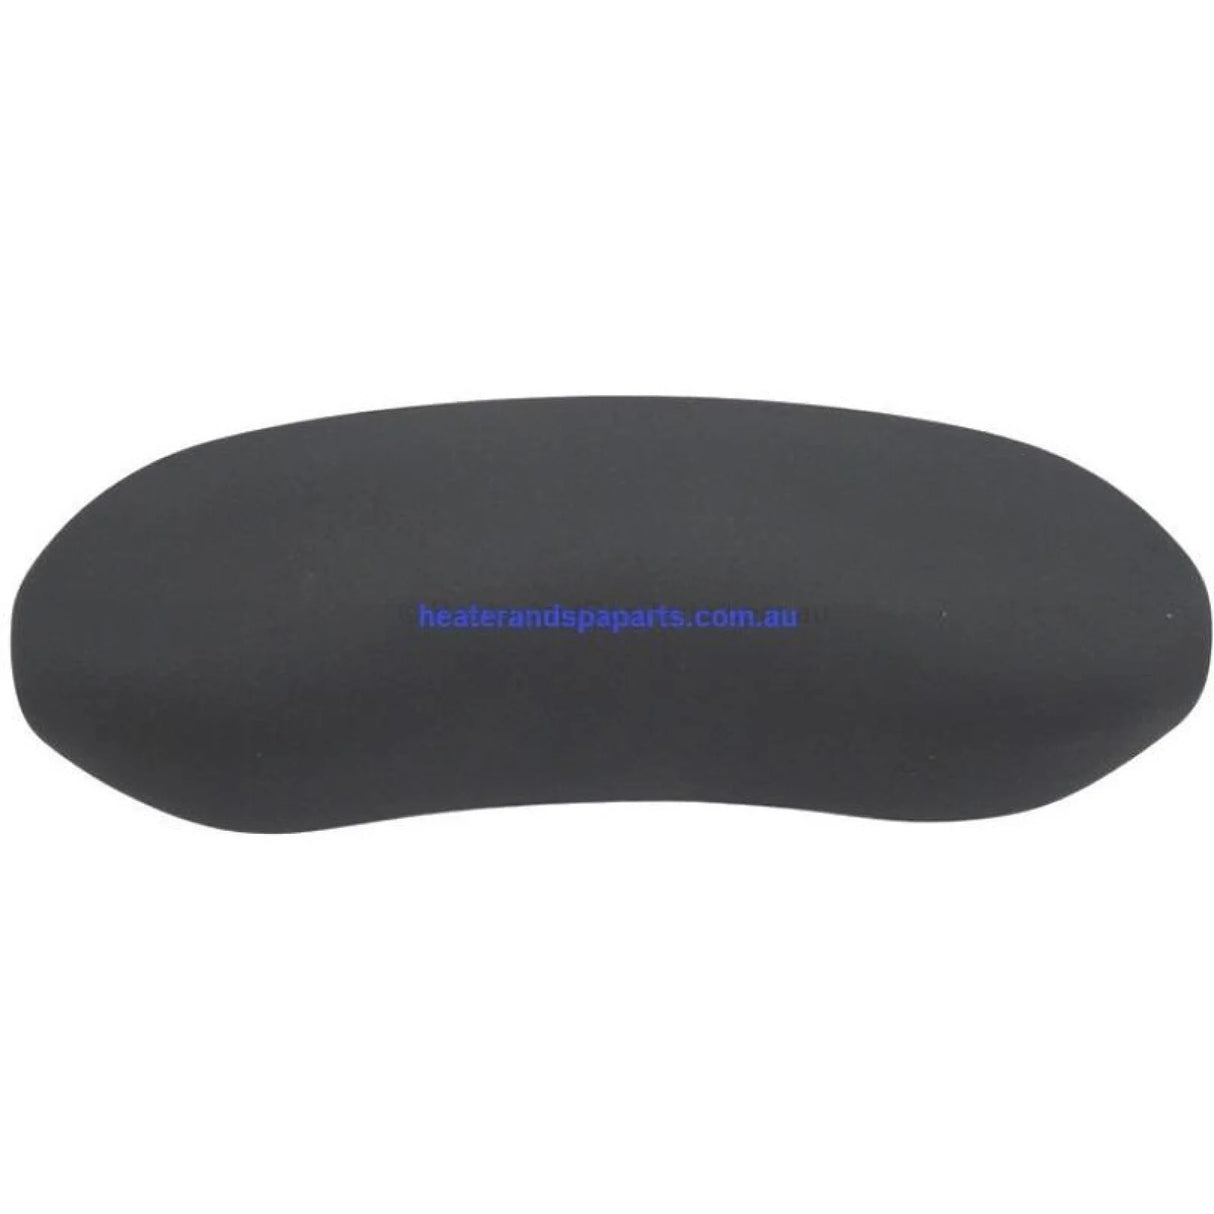 Bullfrog Spas Headrest Pillow Pad & Bracket Holder - Obsolete - No Longer Available - Heater and Spa Parts